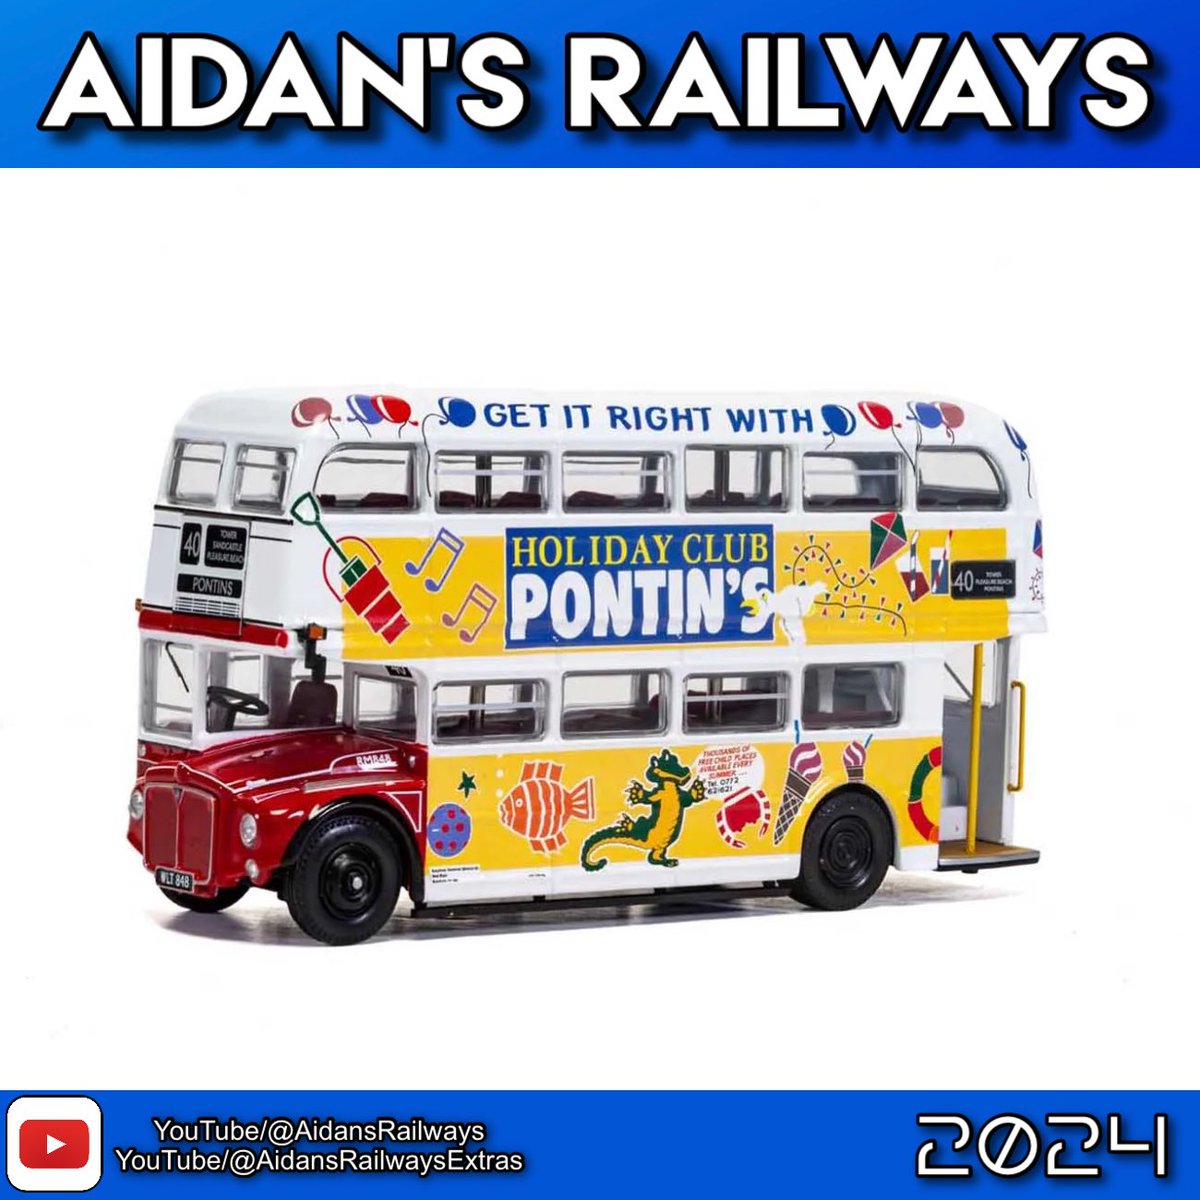 AEC RM – Blackpool Transport, Pontins

Purchase yours here 👉: prf.hn/l/q3BAXPB

#diecastcollector #diecastmodel #diecast #planes #cars #classiccars #classiccar #car #modelrailway #modeltrains #trains #railway #hornbytrains #modelrailways #modeltrain #modelrailroad #train